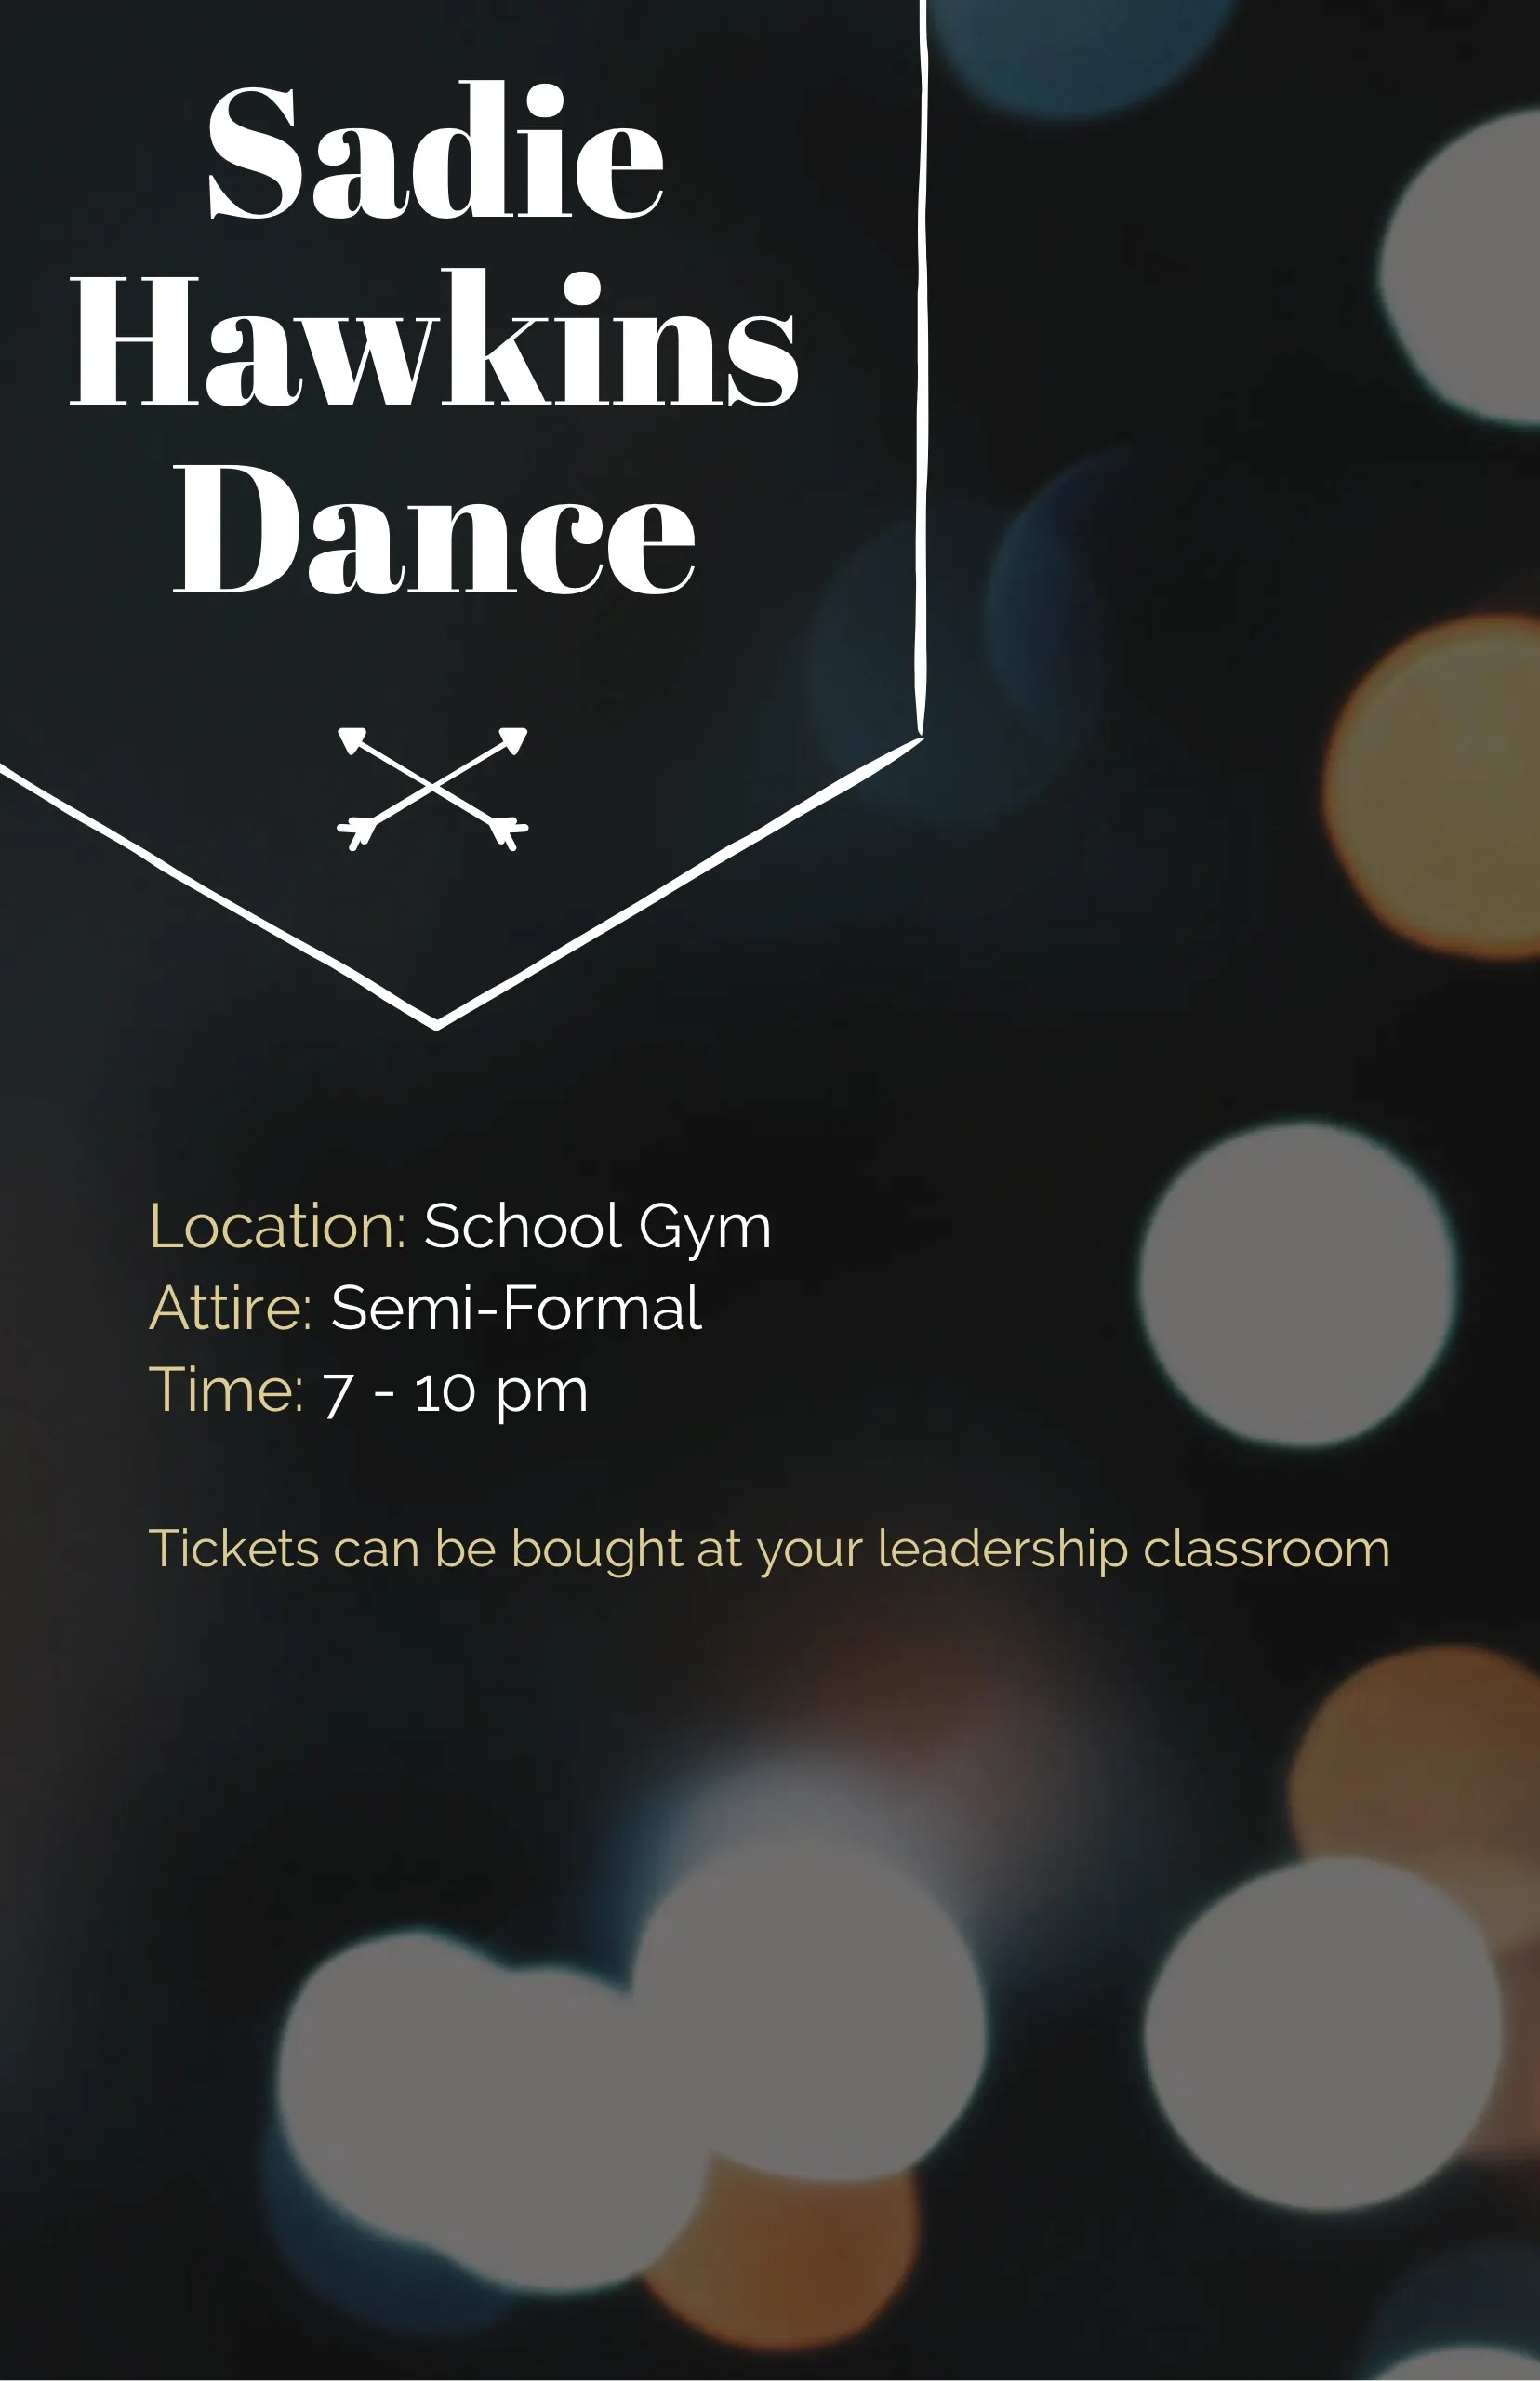 Black and White, Dark Toned Dance Event Poster